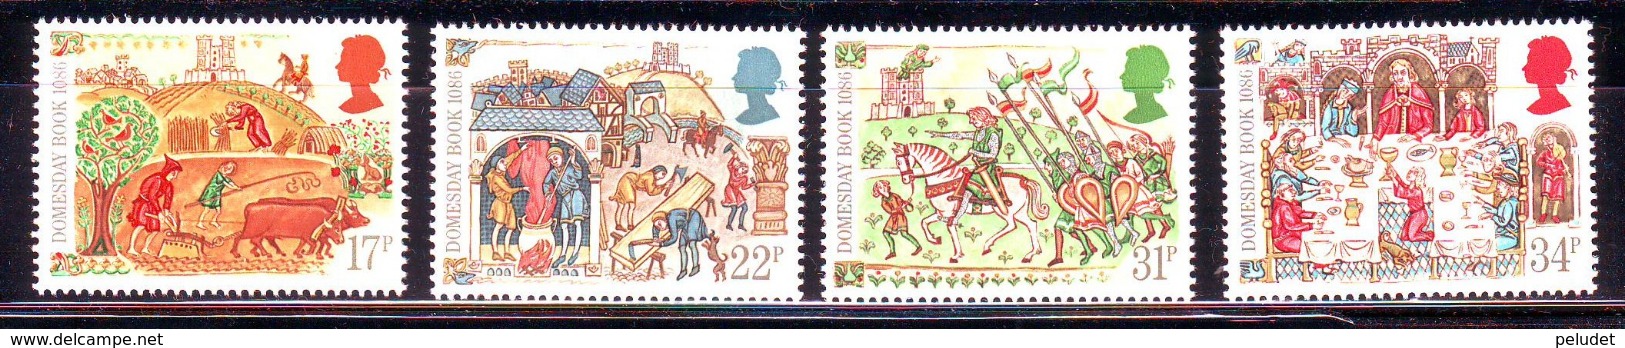 Great Britain 1986 The 900th Anniversary Of The Domesday Book 4 V. ** Mi 1072-75, Sn 1145-48, Yt 1226-29, Sg 1324-27 - Nuevos